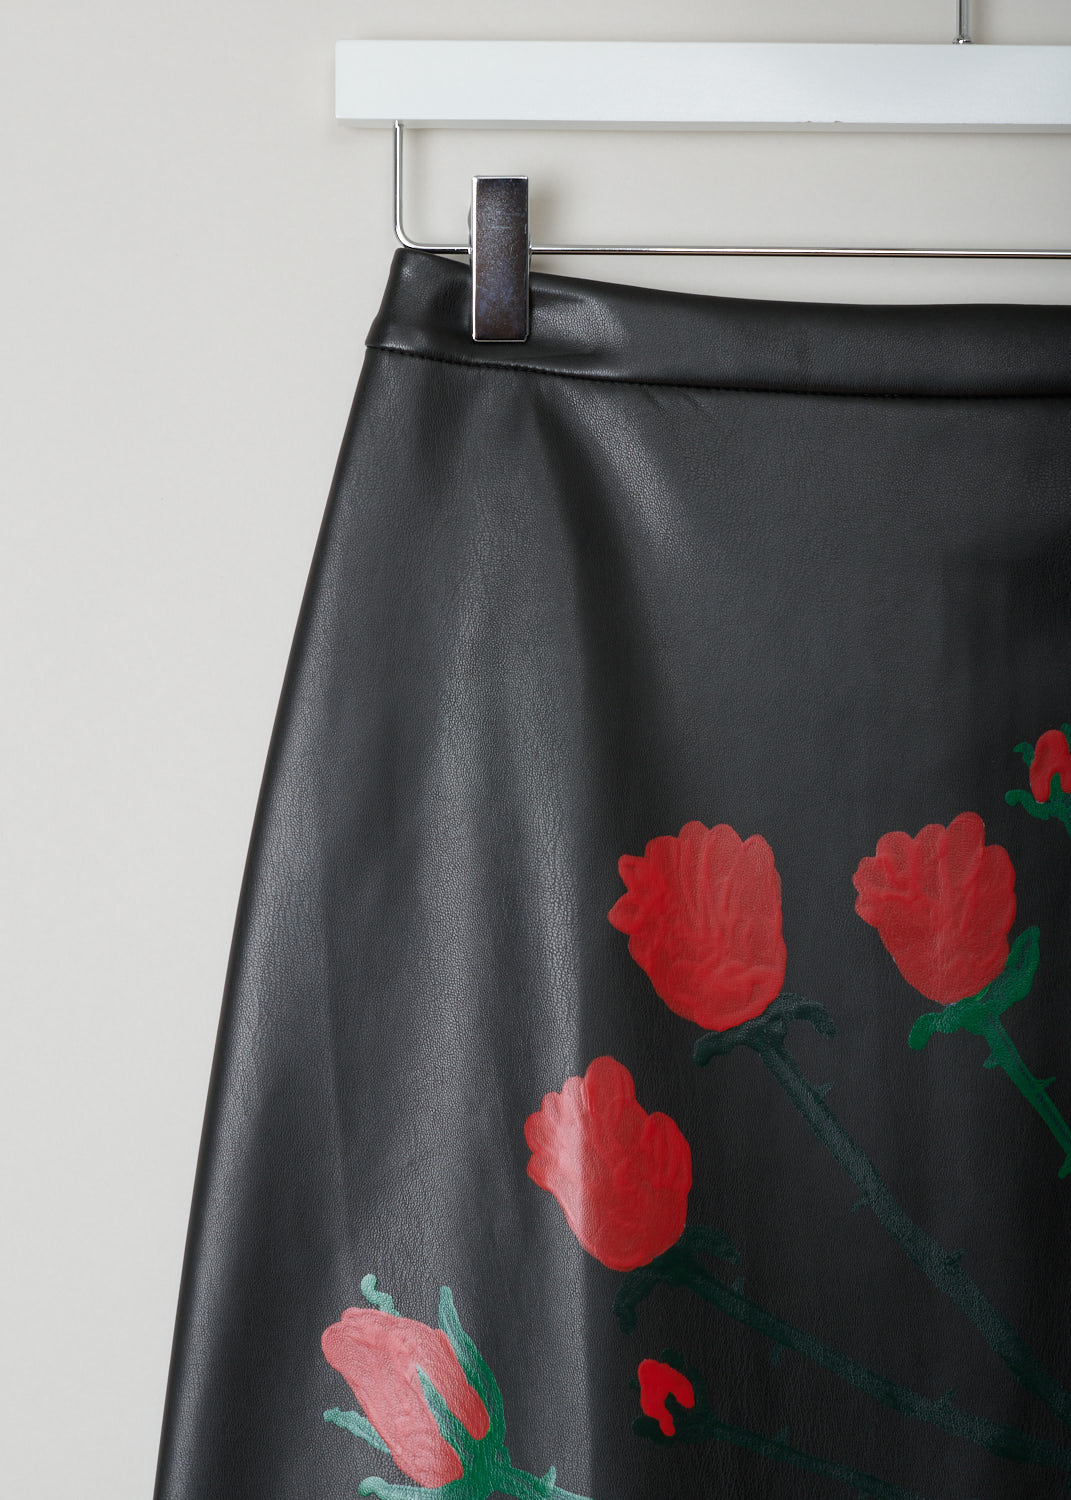 Bernadette, Black vegan leather a-line skirt, skirt_eva_vegan_leather_handpainted_red_rose_bouquet, black red green, detail, You will not only look good but also do good, in this vegan leather skirt. Made into an a-line model with a concealed zip fastening option on the back. The red roses on the skirt are entirely hand painted which adds to the exclusivity. 